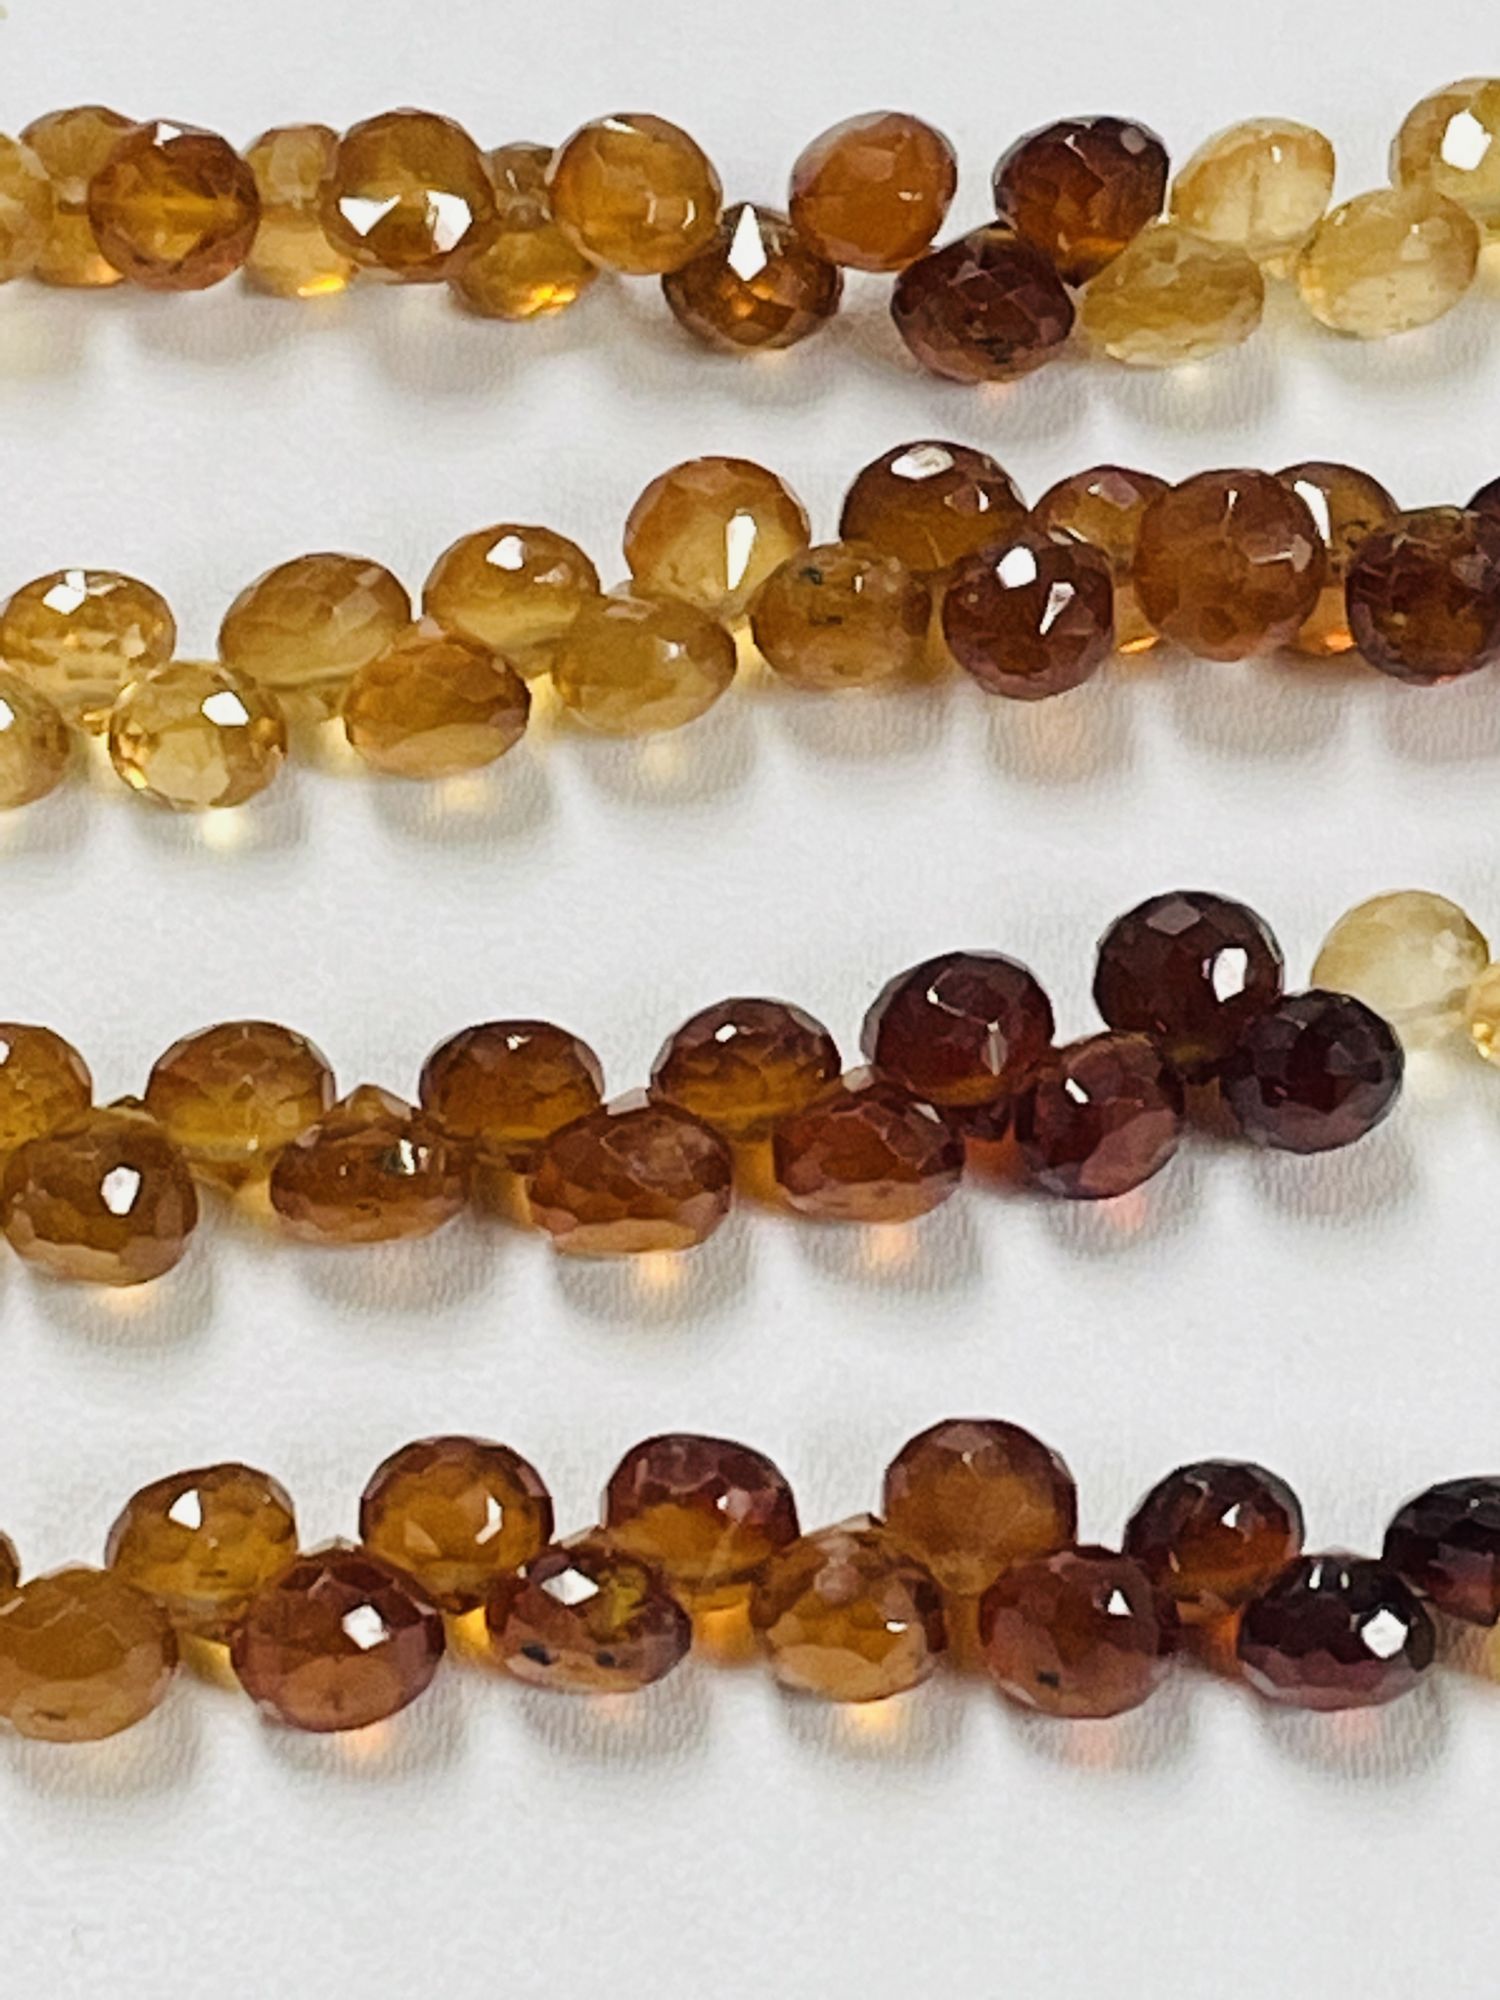 Shaded Hessonite Garnet Onion Faceted